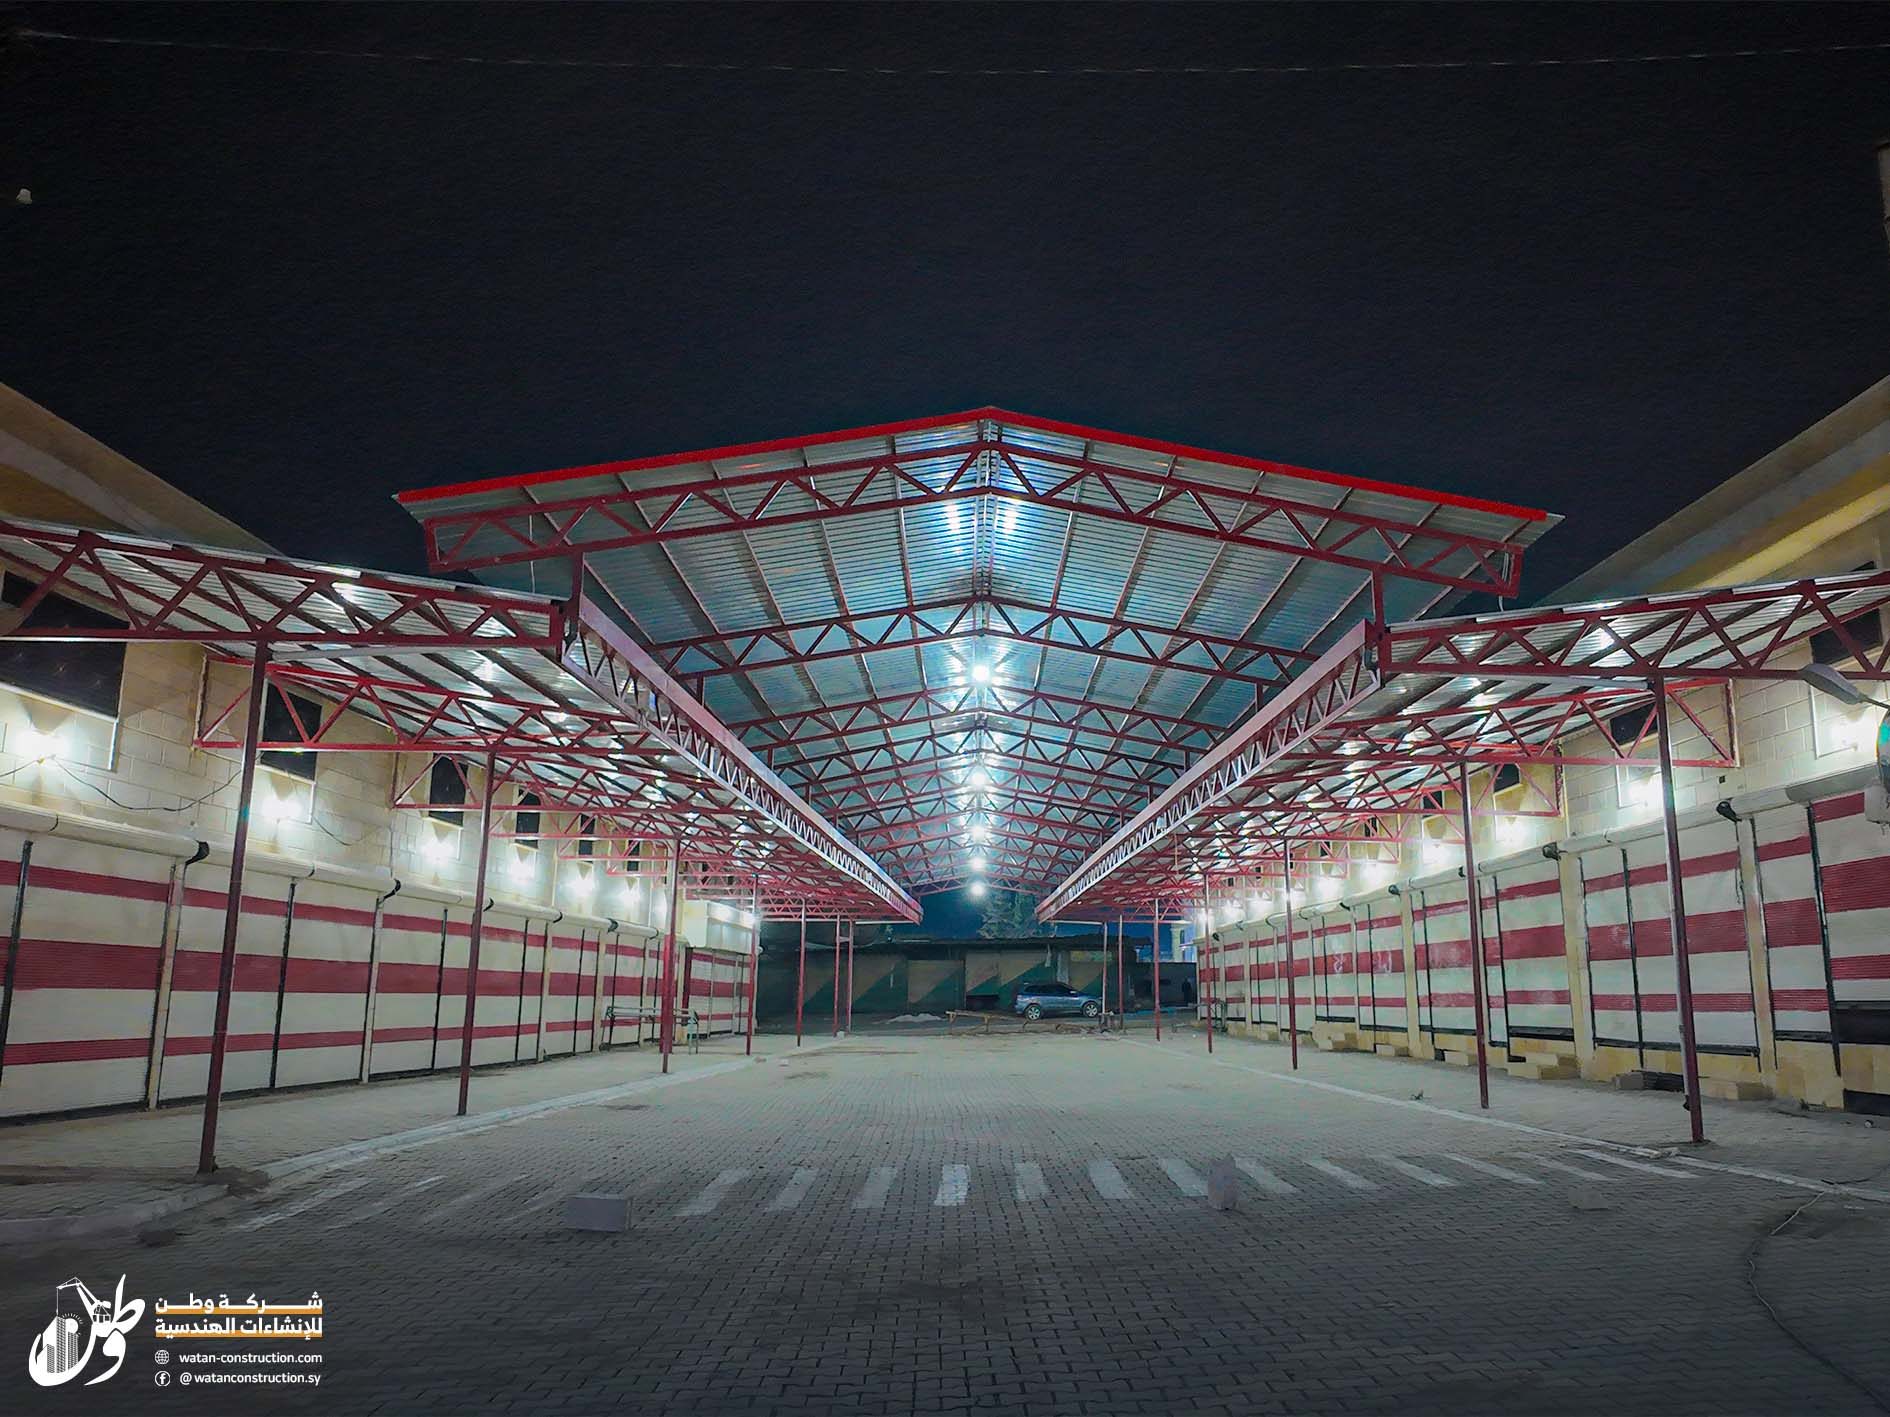 Night photos of the oil and grain market in Afrin1